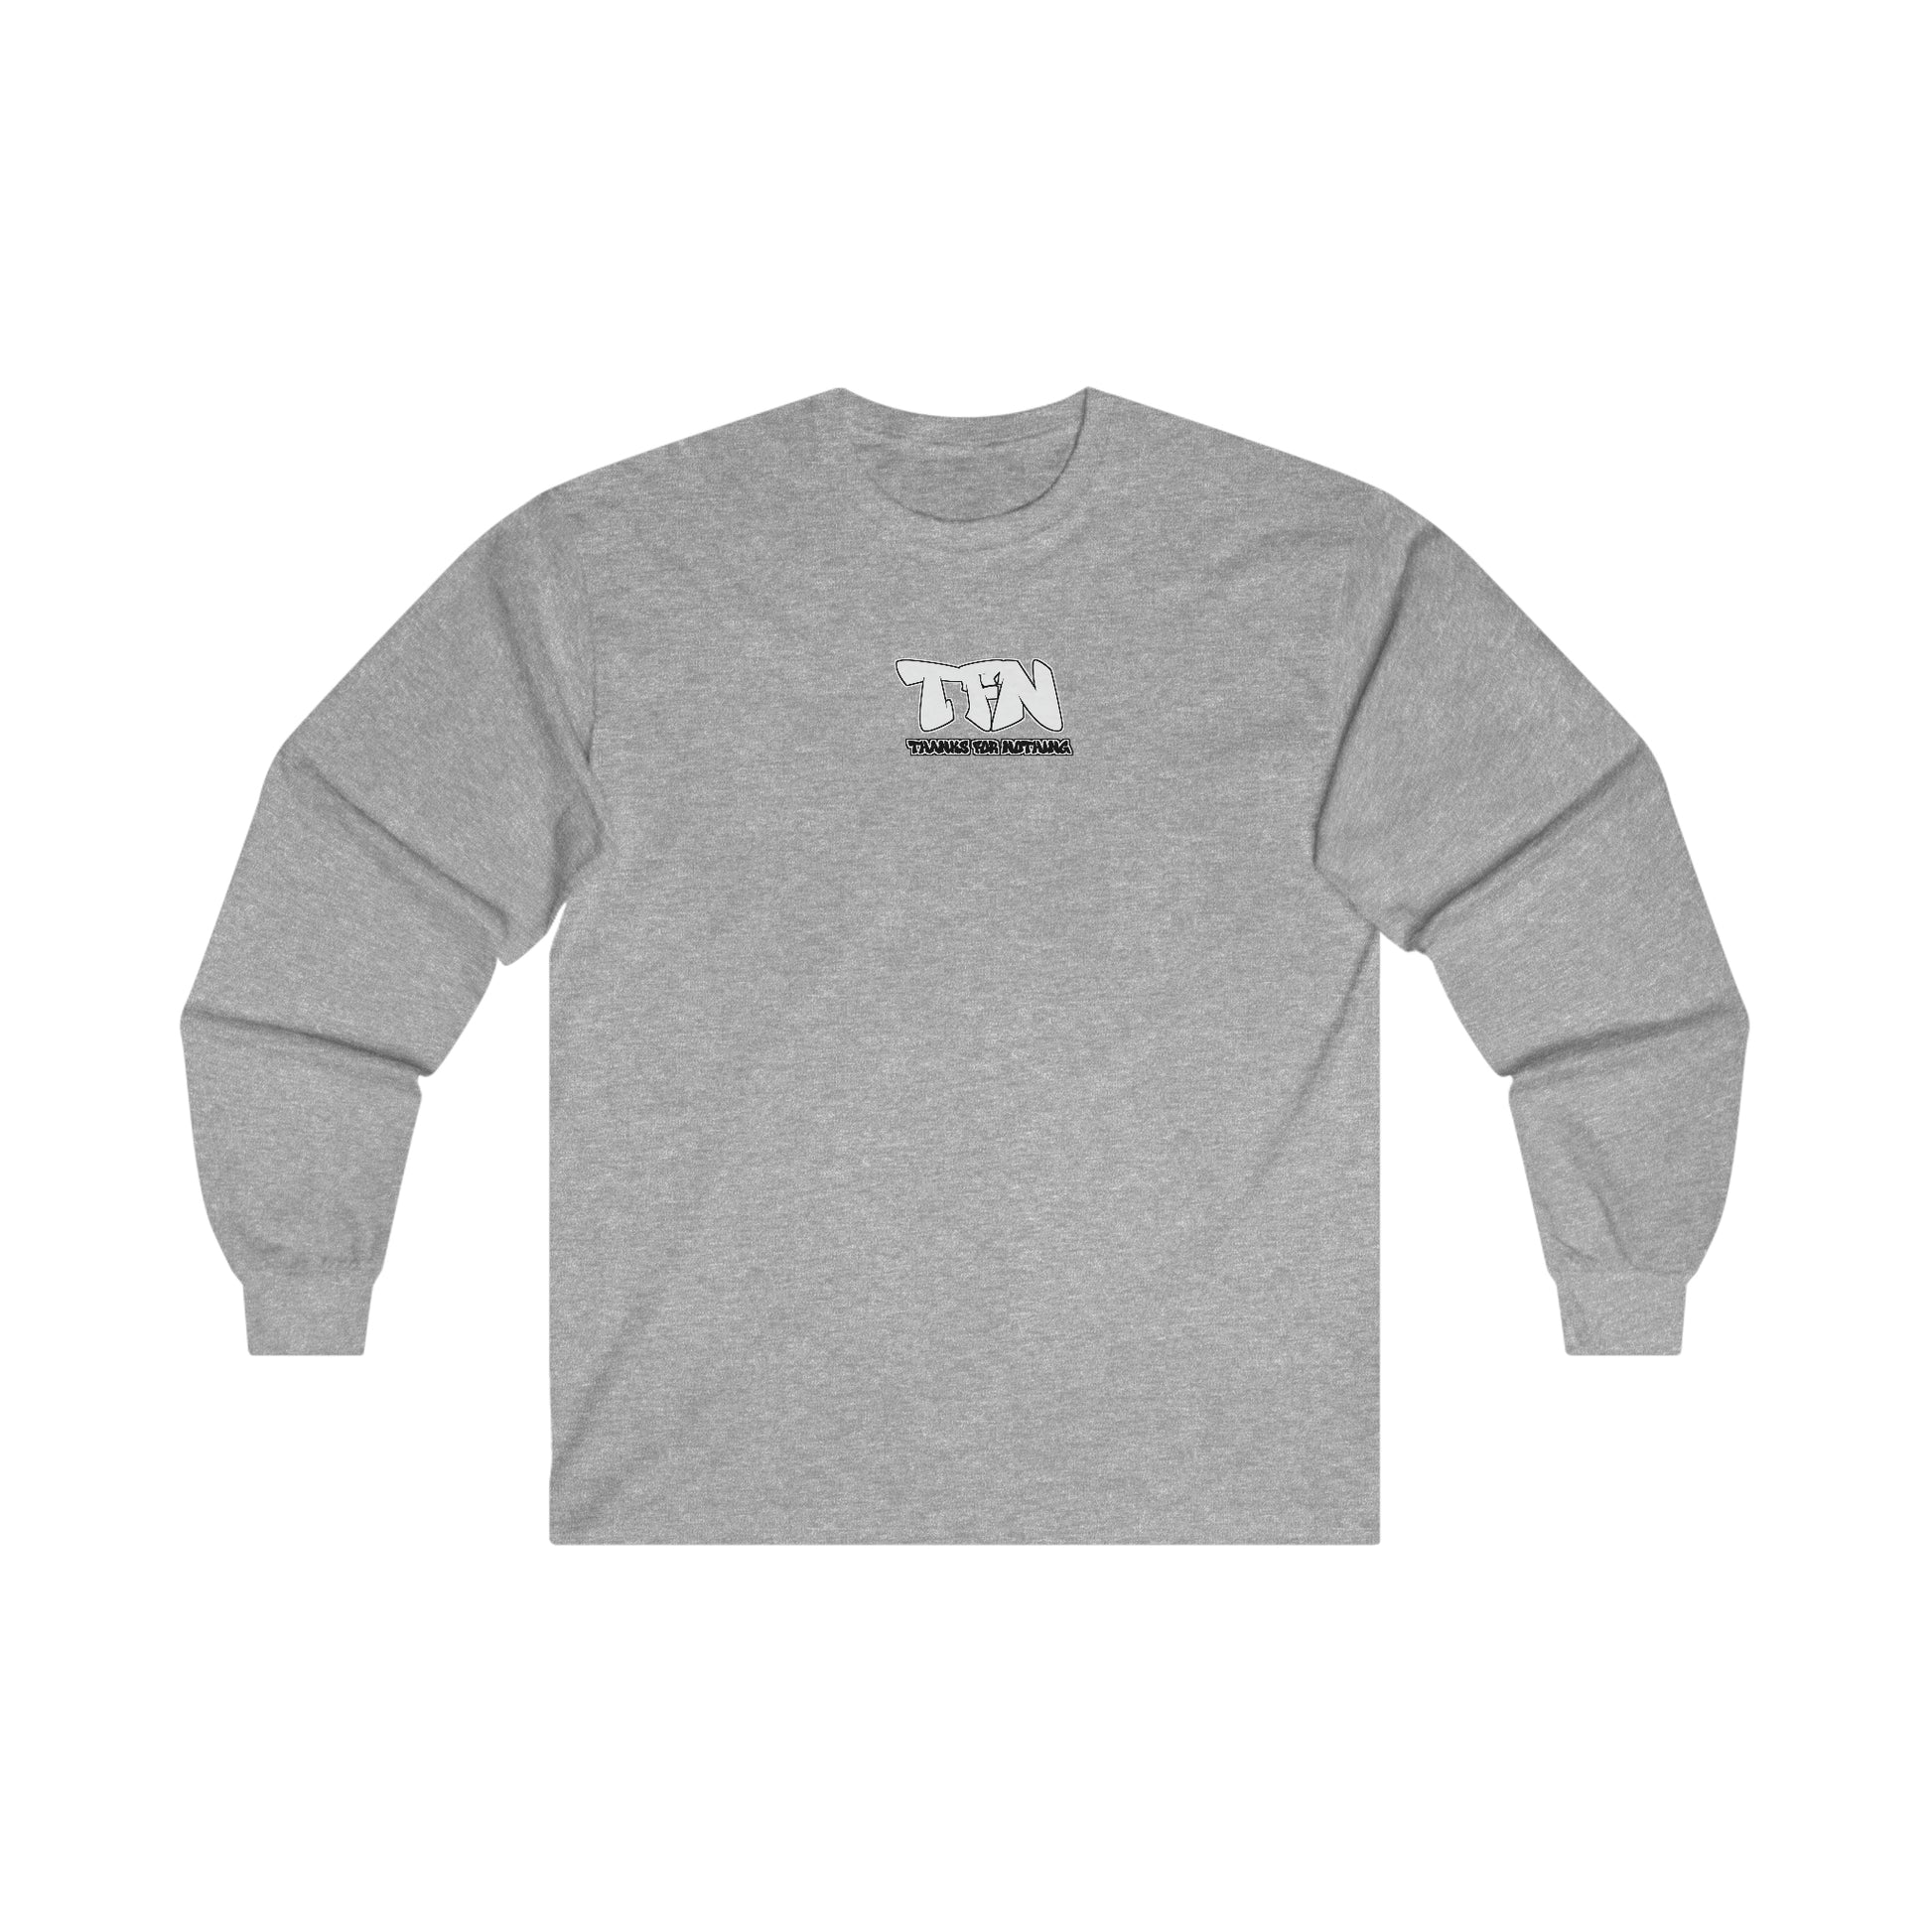 "TFN Thanks For Nothing Long" Long Sleeve Tee Printify